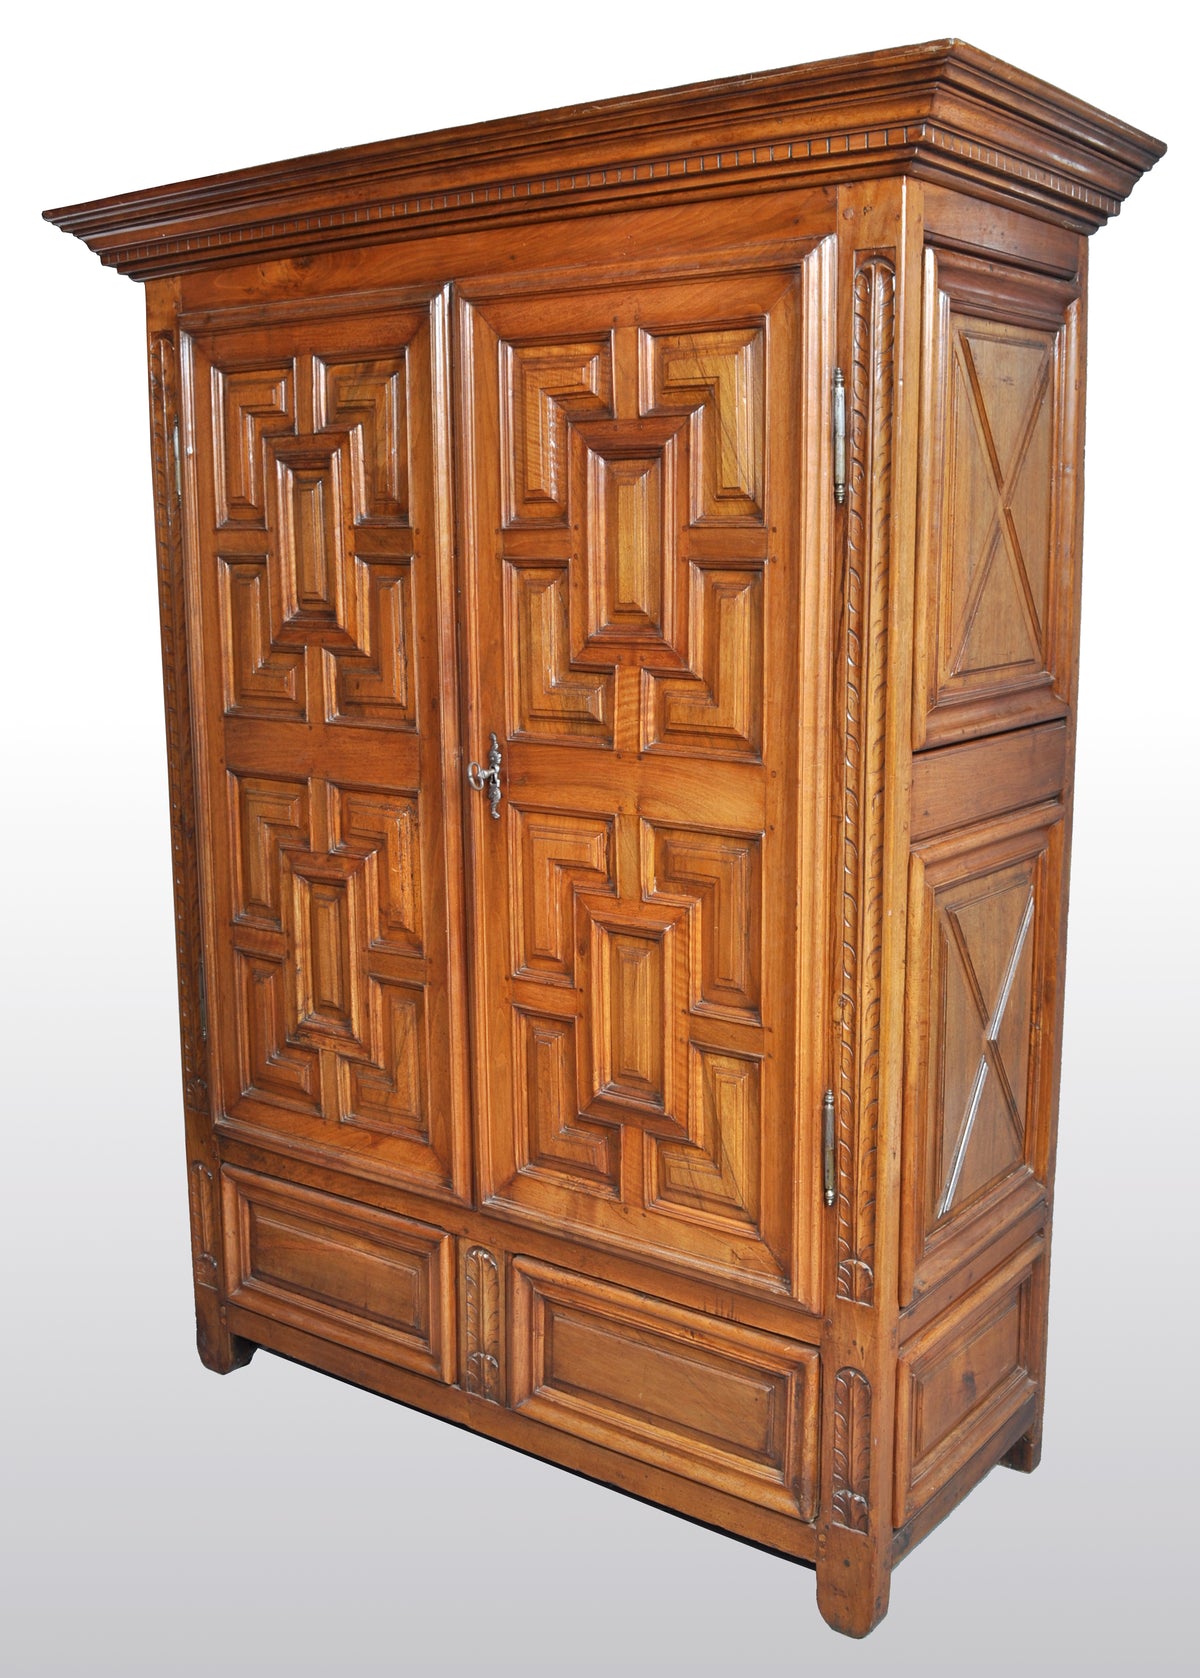 Antique French Provincial Walnut Armoire / Cabinet, circa 1750